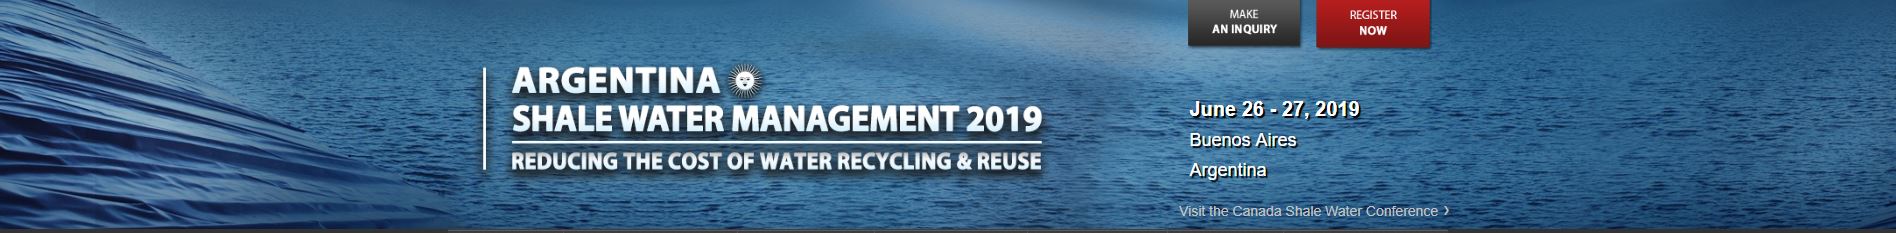 Argentina Shale Water Management 2019, Buenos Aires, Argentina